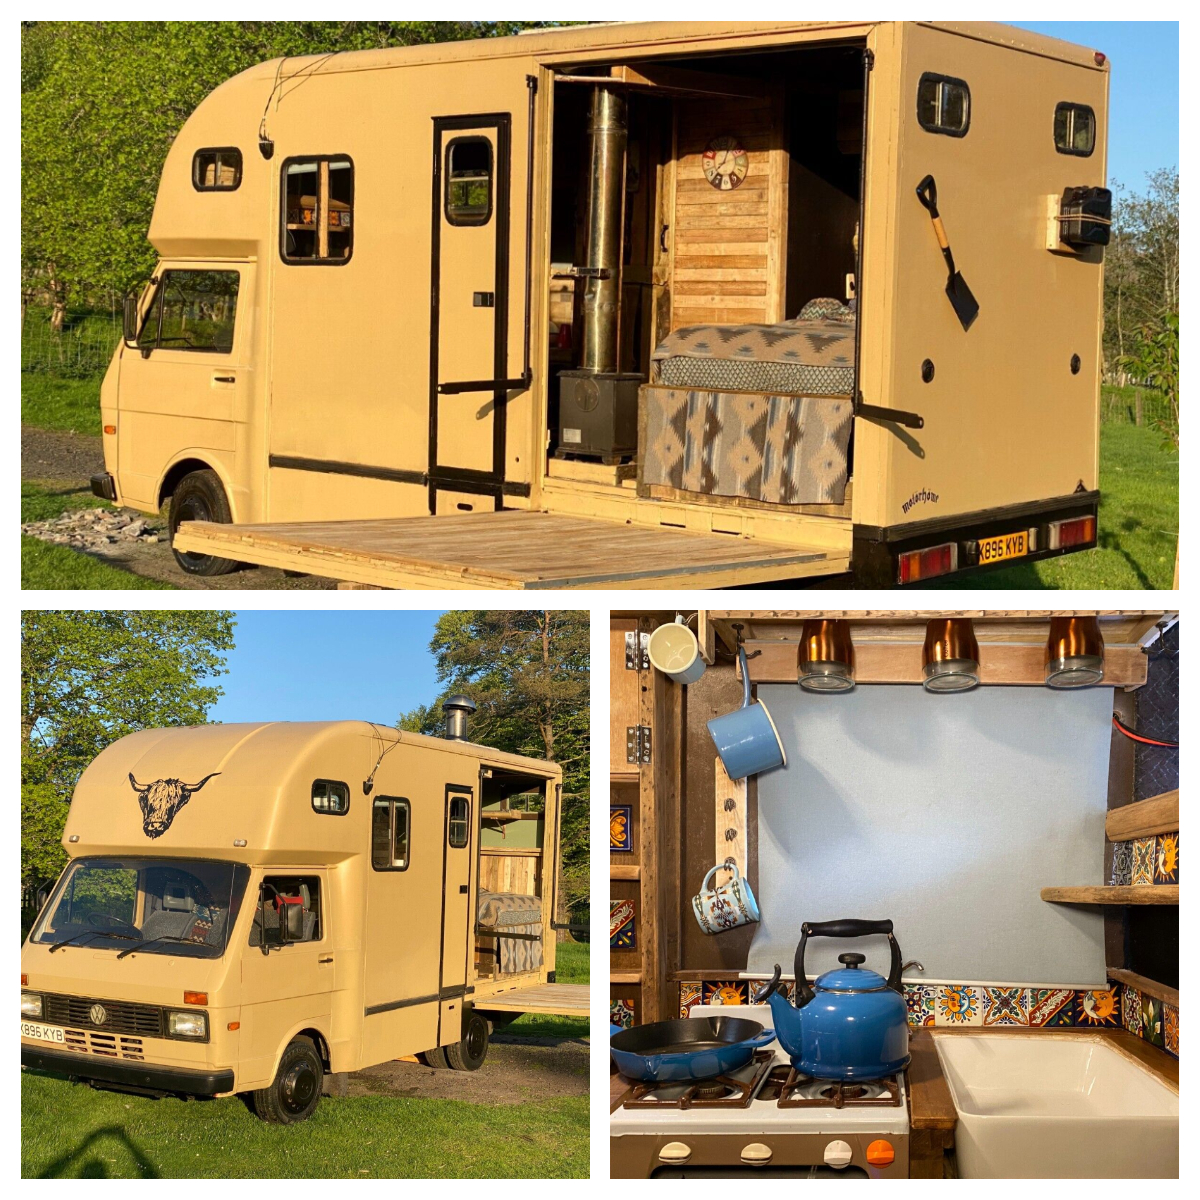 Ad - OFF-GRID “LOG CABIN” STYLE VW LT HORSEBOX WITH DROP DOWN OUTSIDE TERRACE SEATING
On eBay here -->> ow.ly/cozY50PG09g

 #offgridliving #logcabinstyle #horseboxconversion #outdoorliving #tinyhomeonwheels #campervanlife #uniquehome